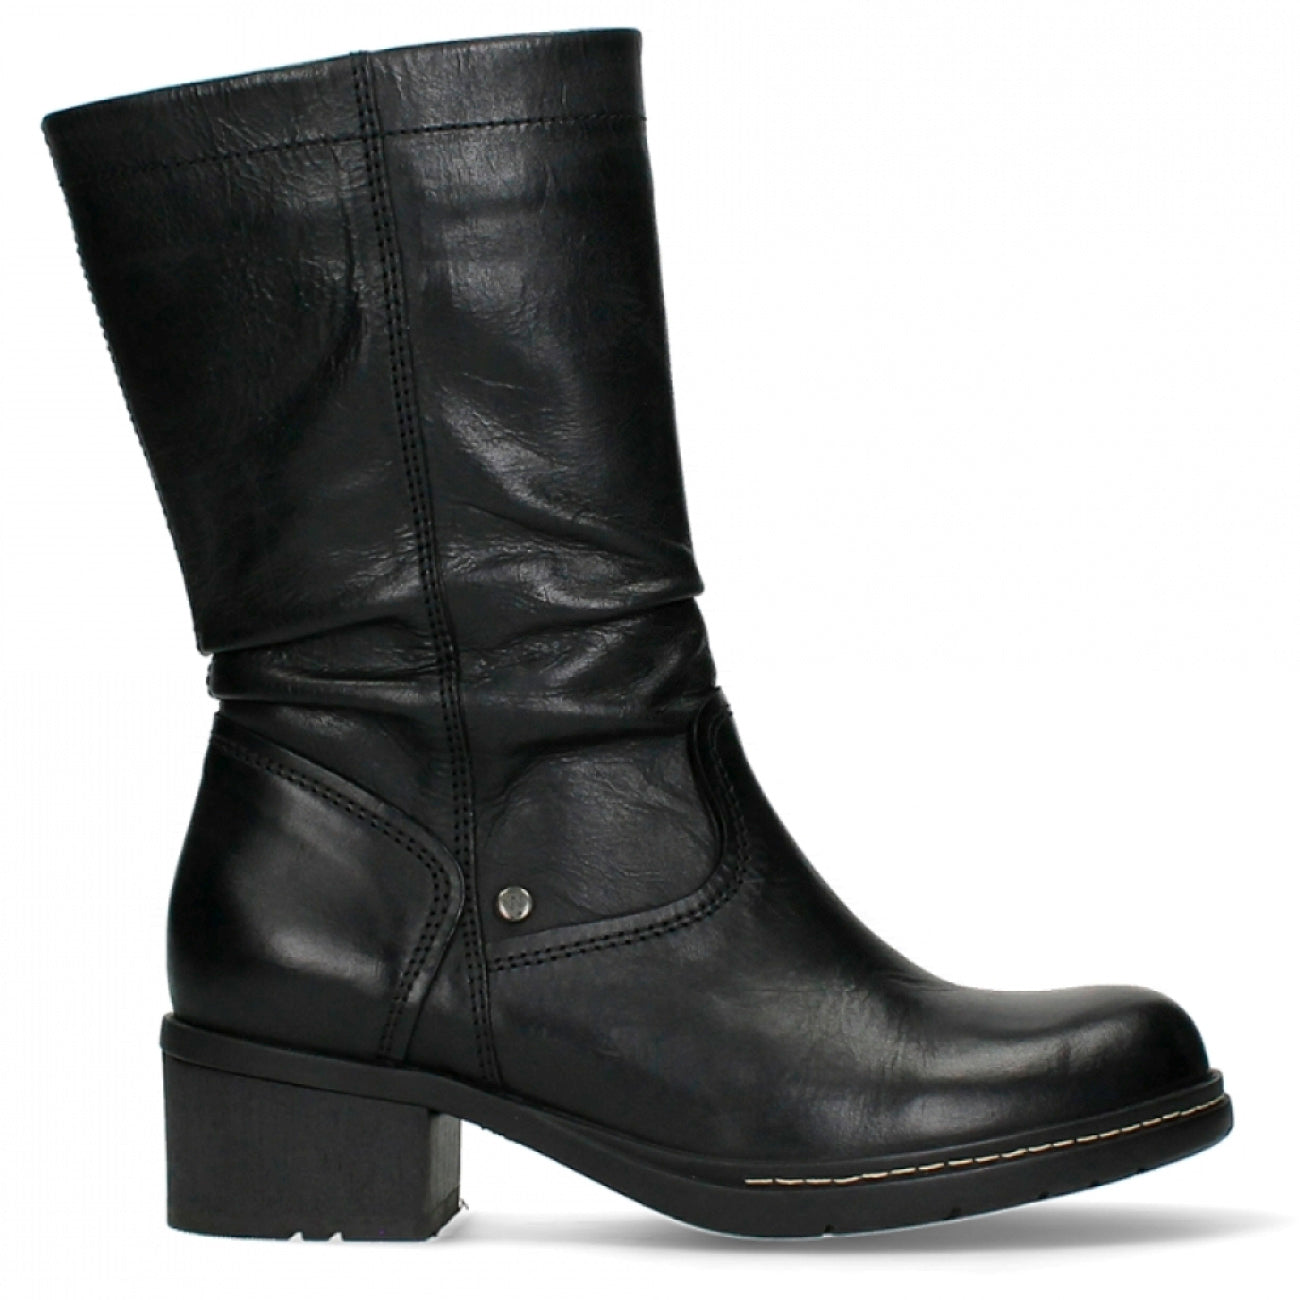 Wolky, Edmonton, Boots, Soft Wax Leather, Black Boots Wolky Black 38 